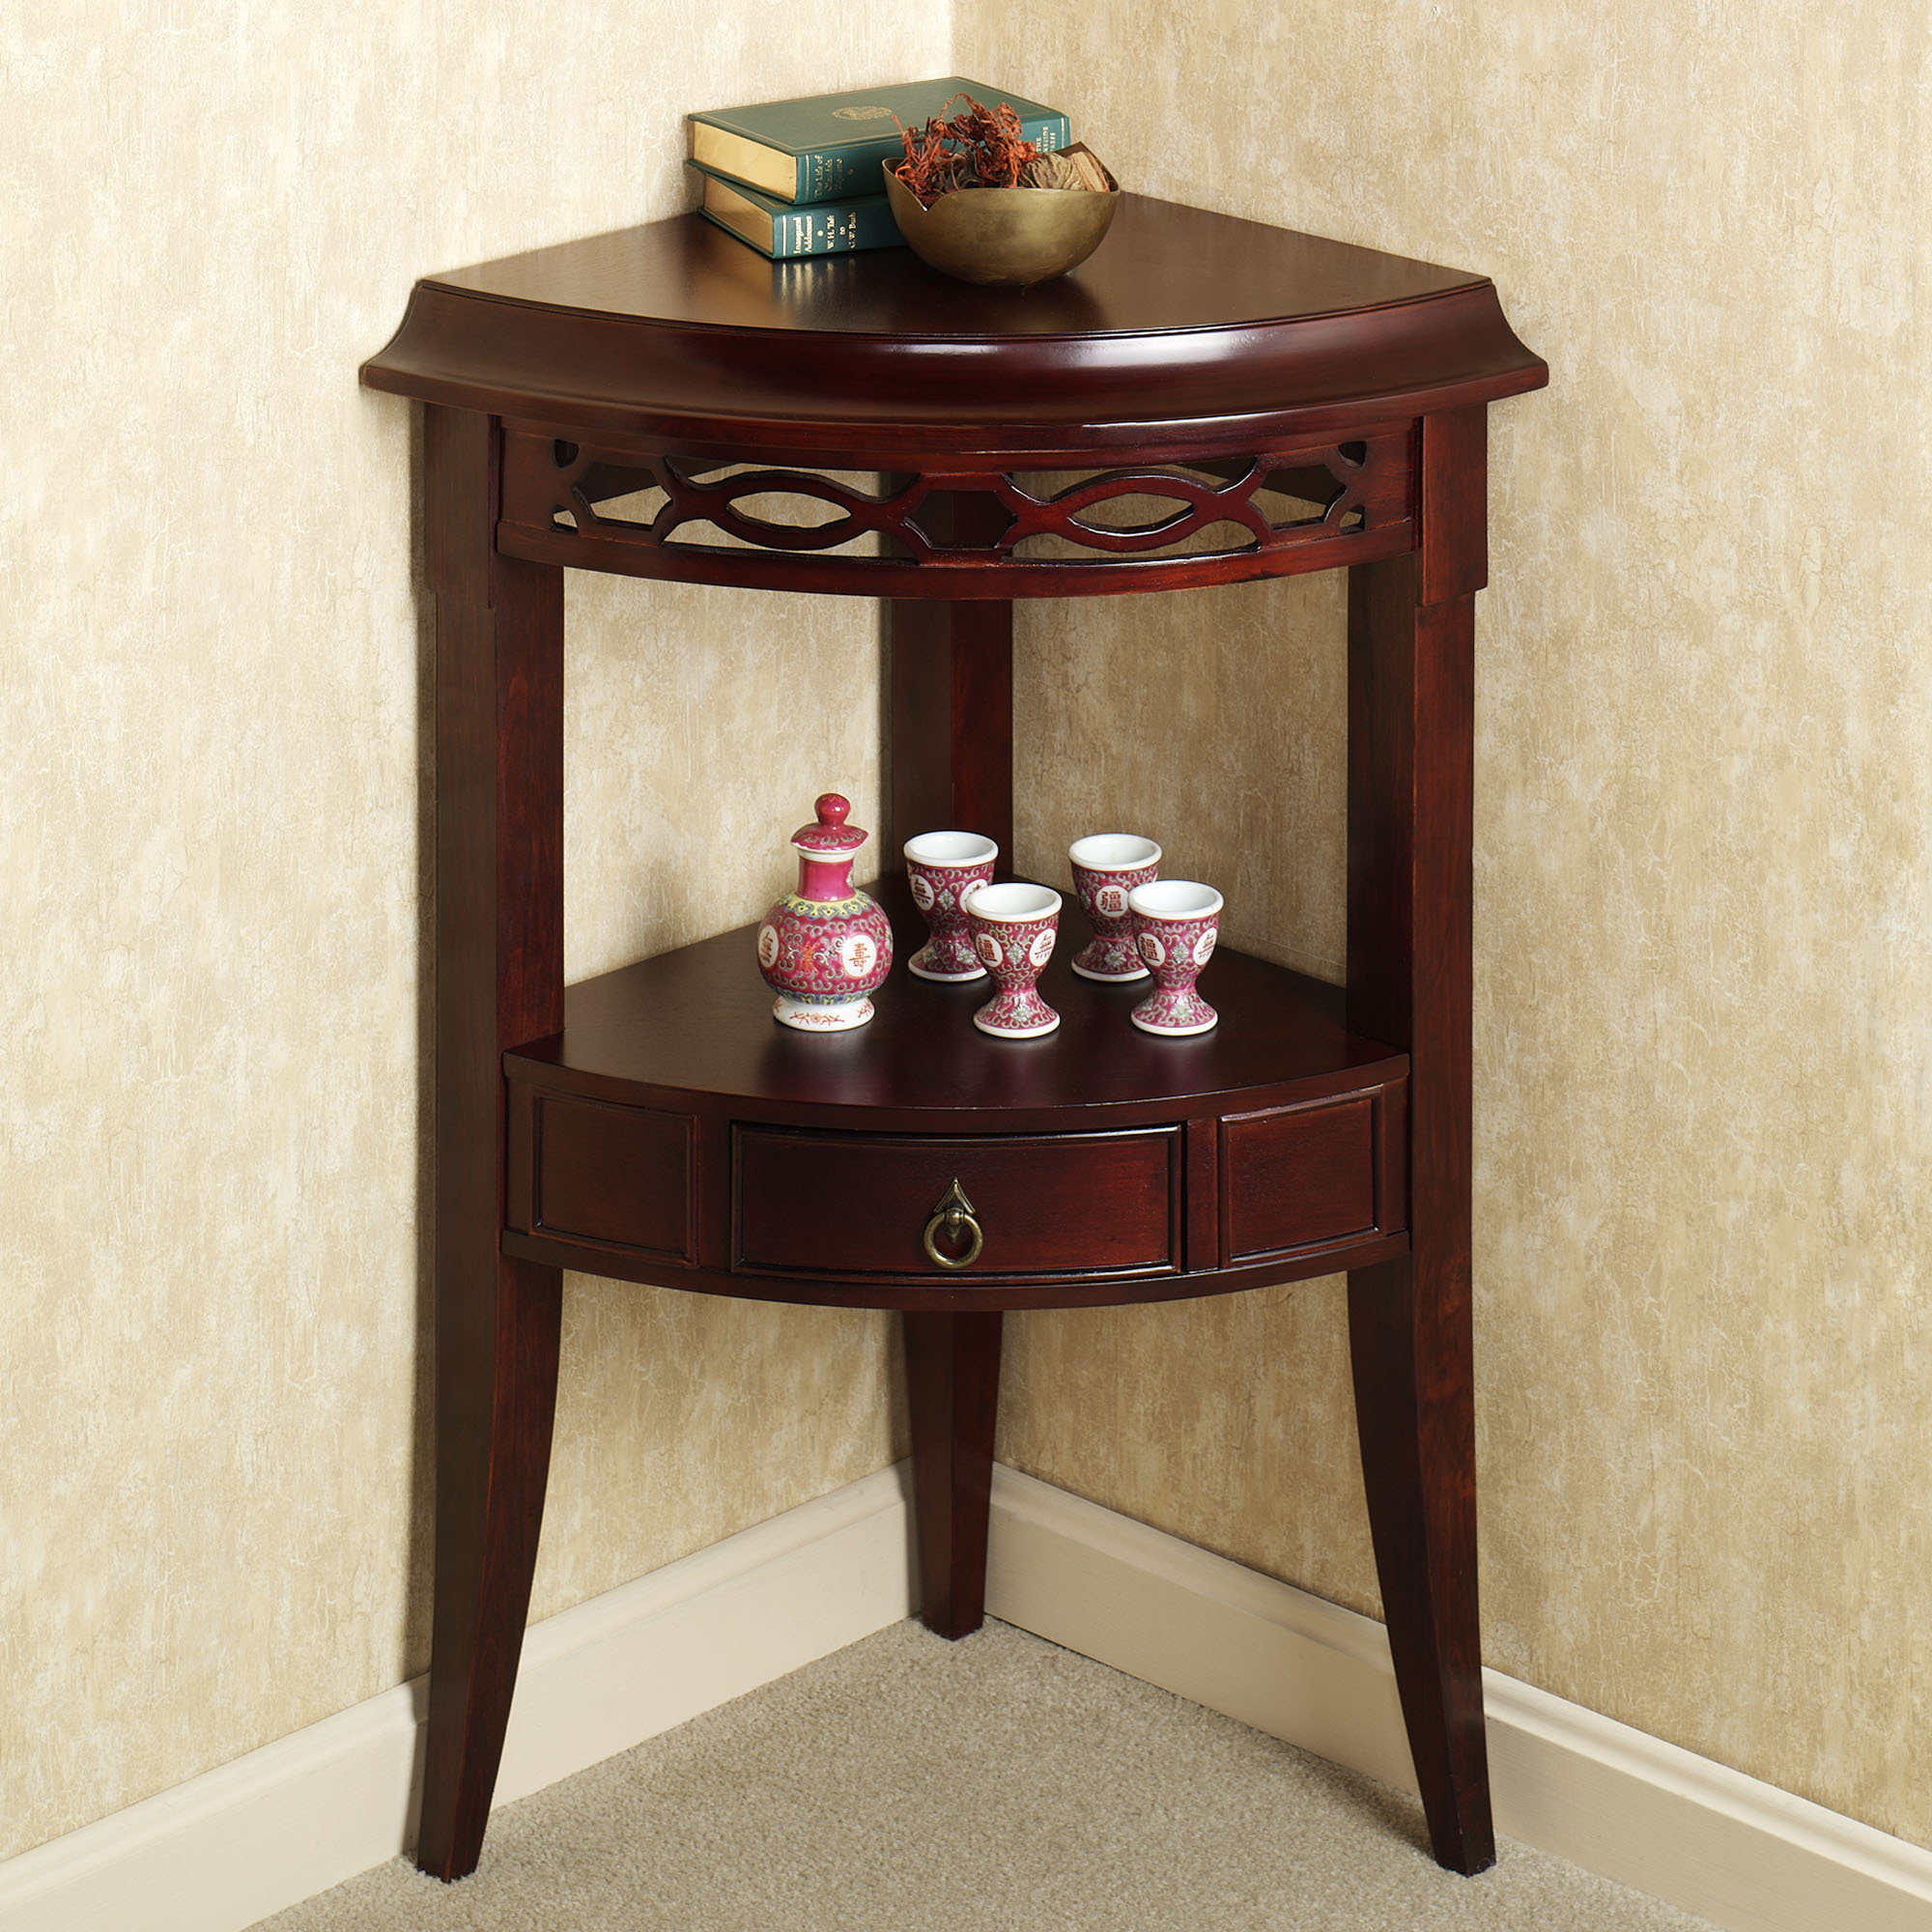 round gold accent table the fantastic cool small cherry wood end various options for corner design gestablishment home furniture tables ideas ashley brown couch young america